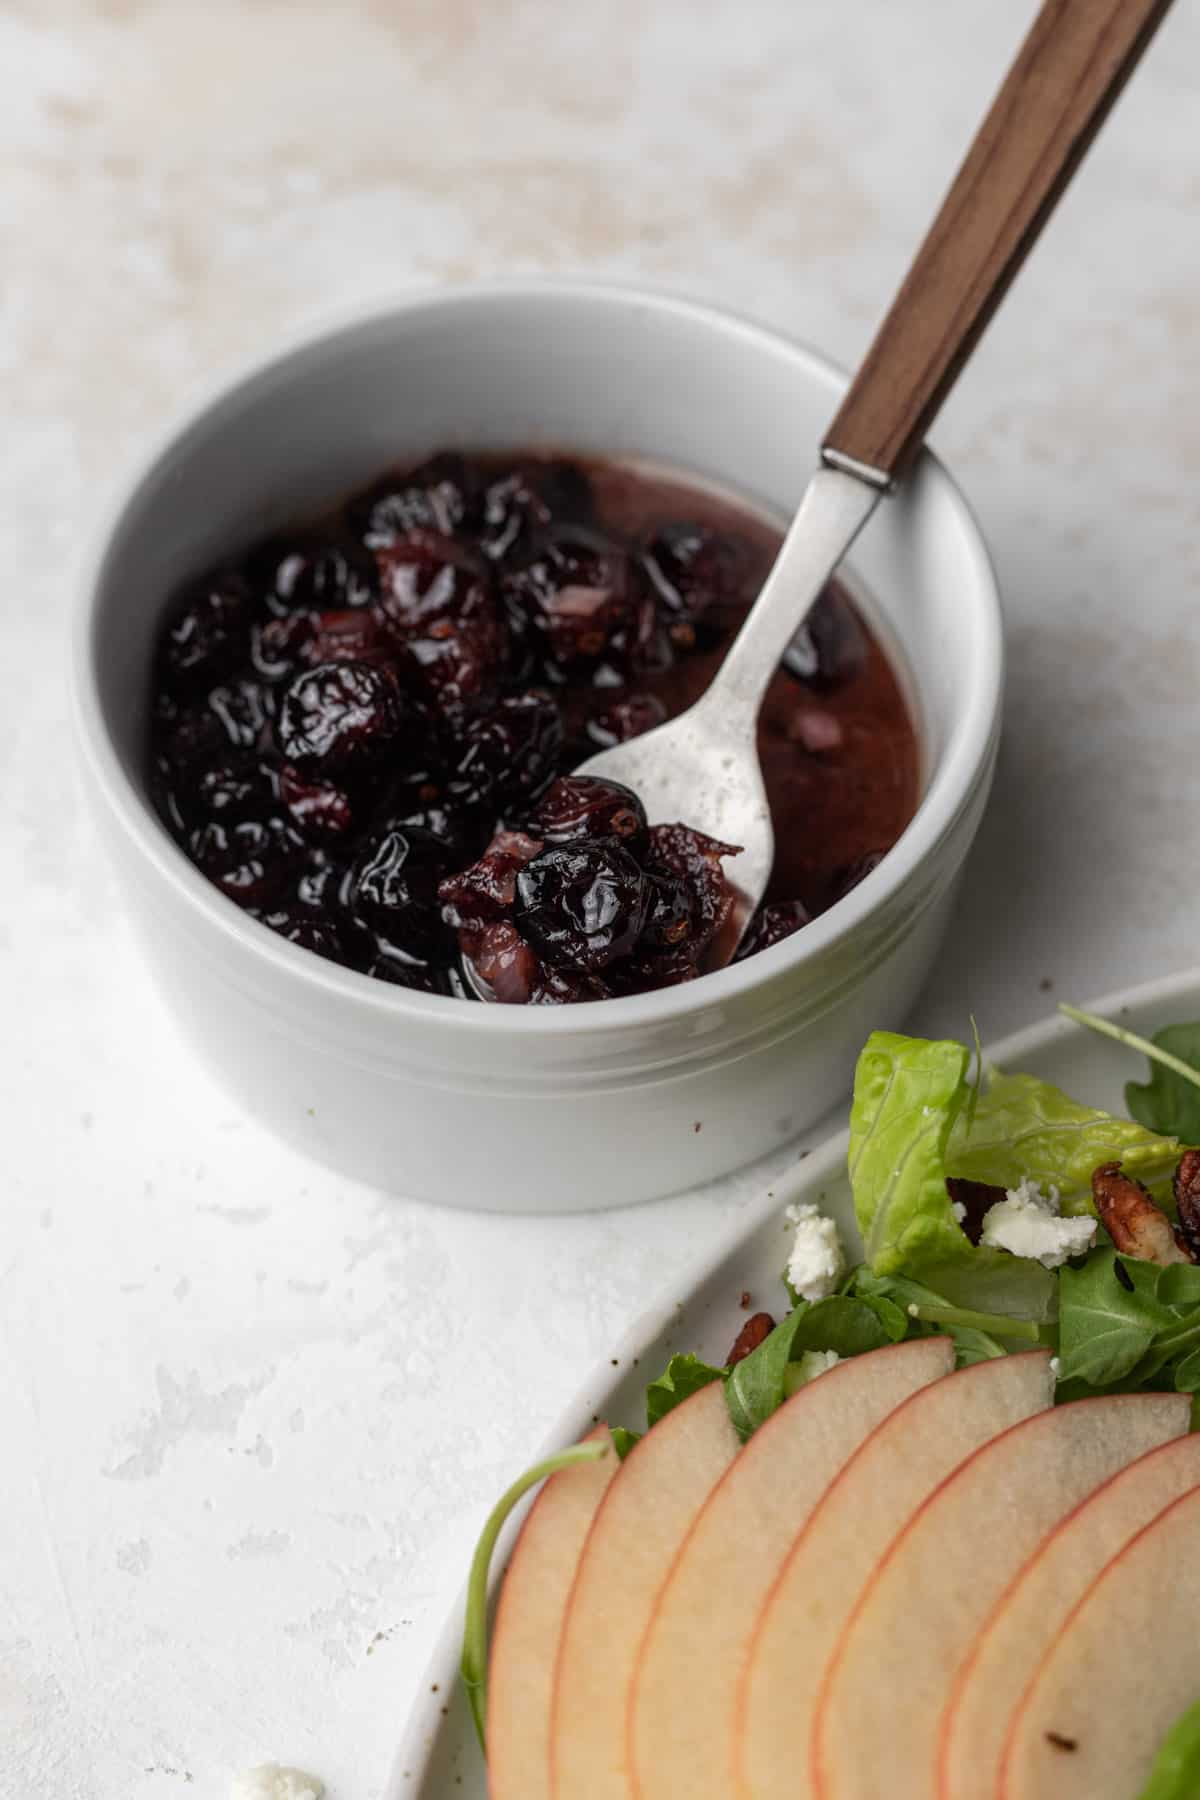 A closeup view of the homemade warm cranberry vinaigrette in a small bowl on the side of the arugula salad.